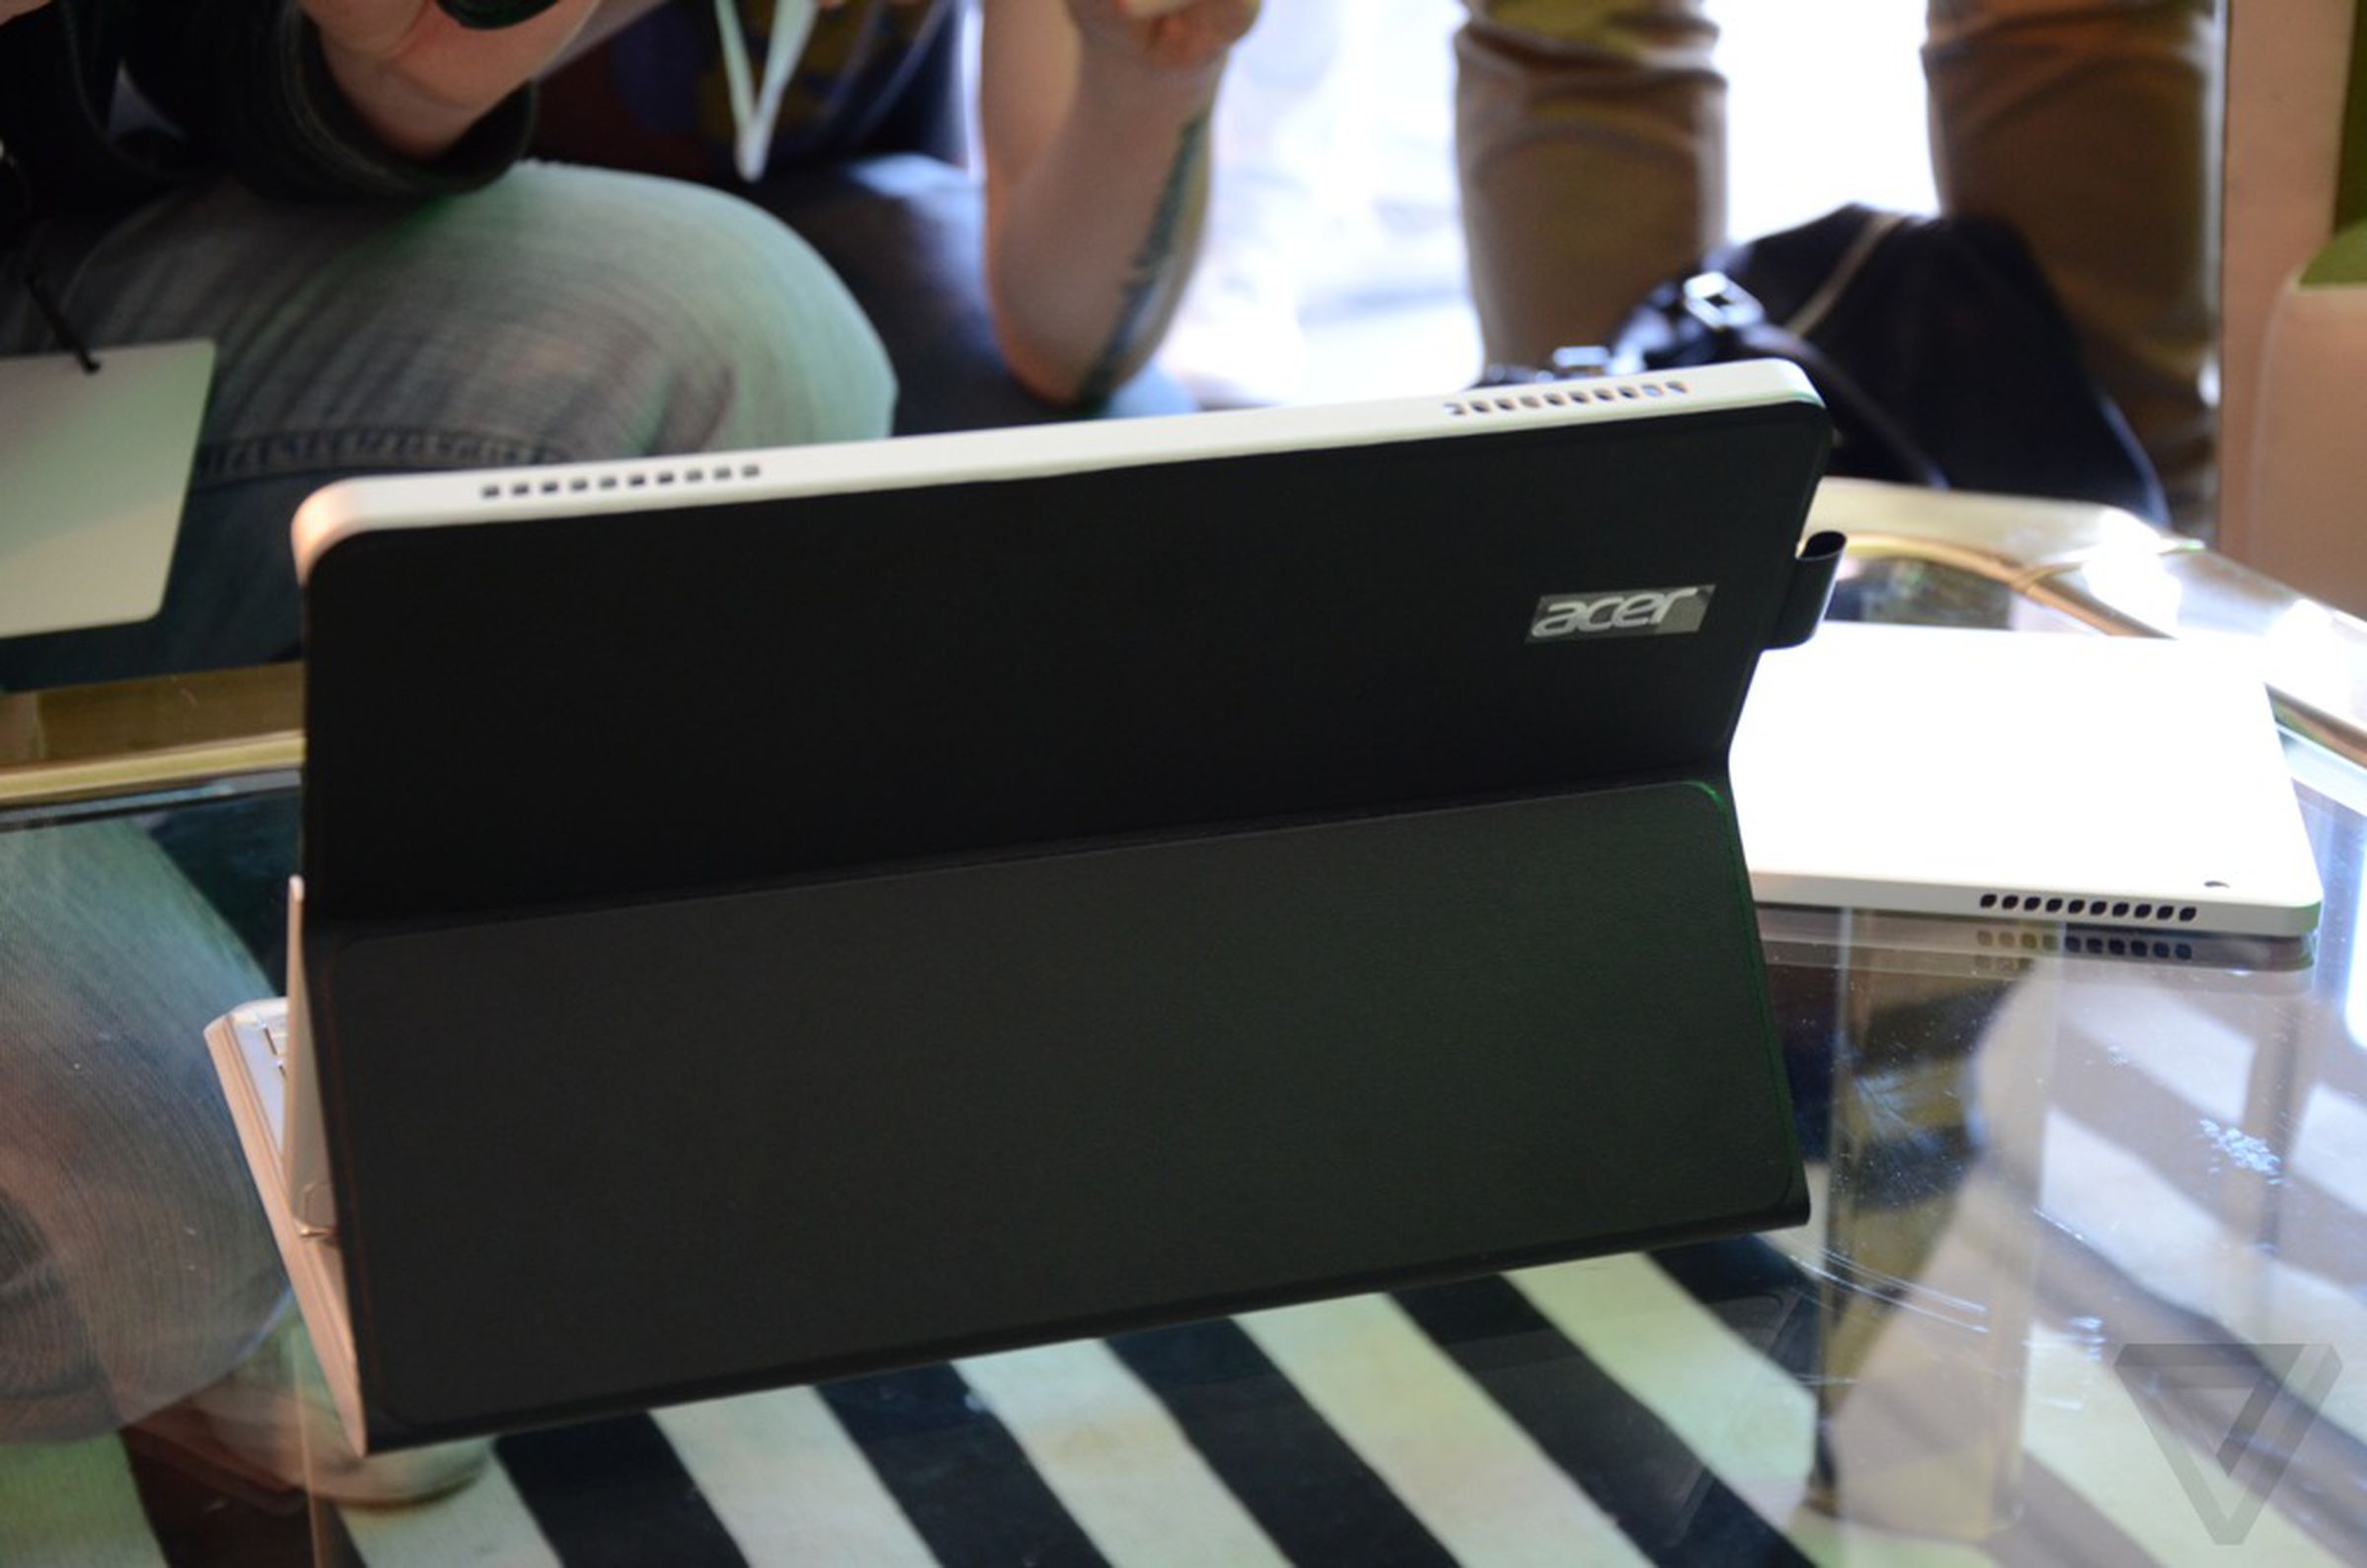 Acer Aspire P3 hands-on pictures